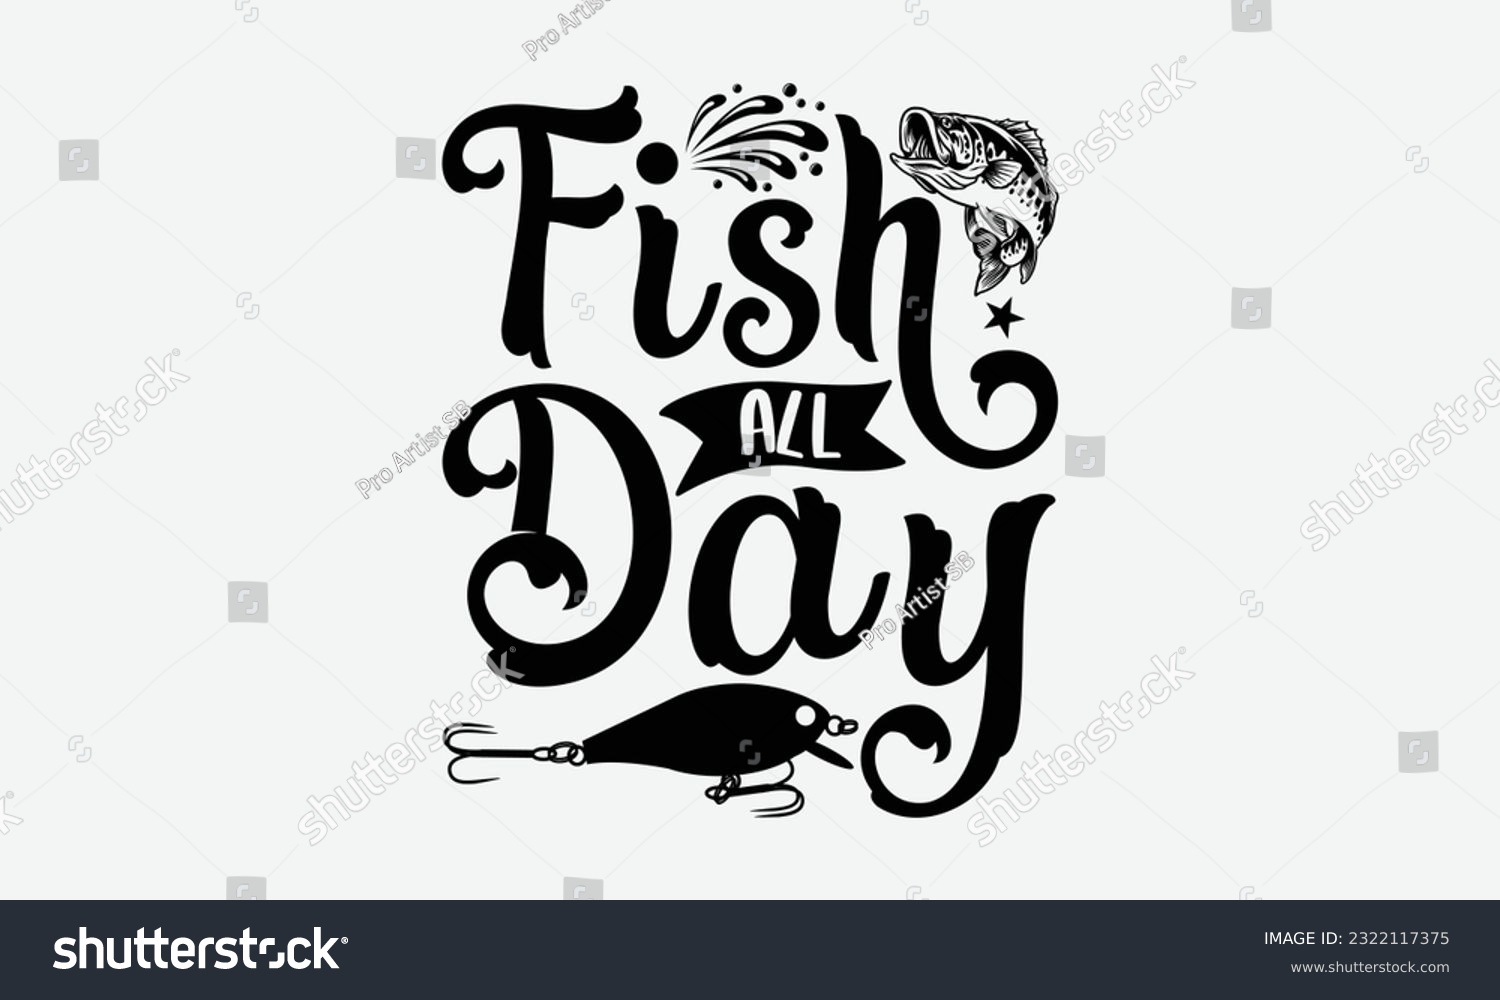 SVG of Fish All Day - Fishing SVG Design, Fisherman Quotes, Hand Written Vector T-Shirt Design, For Prints on Mugs and Bags, Posters. svg